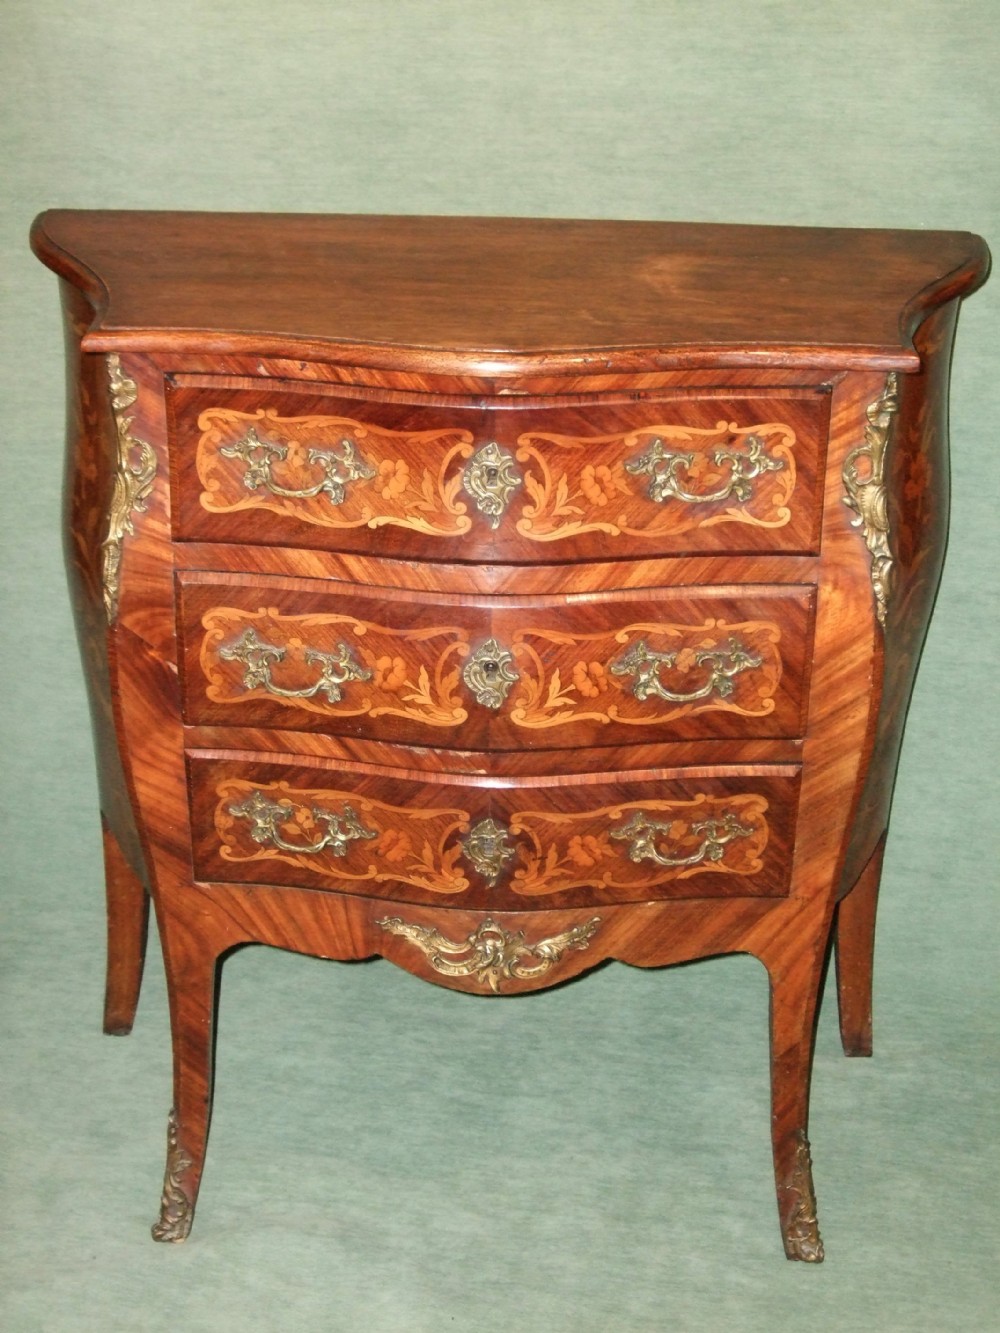 19thc french inlaid kingwood small chest